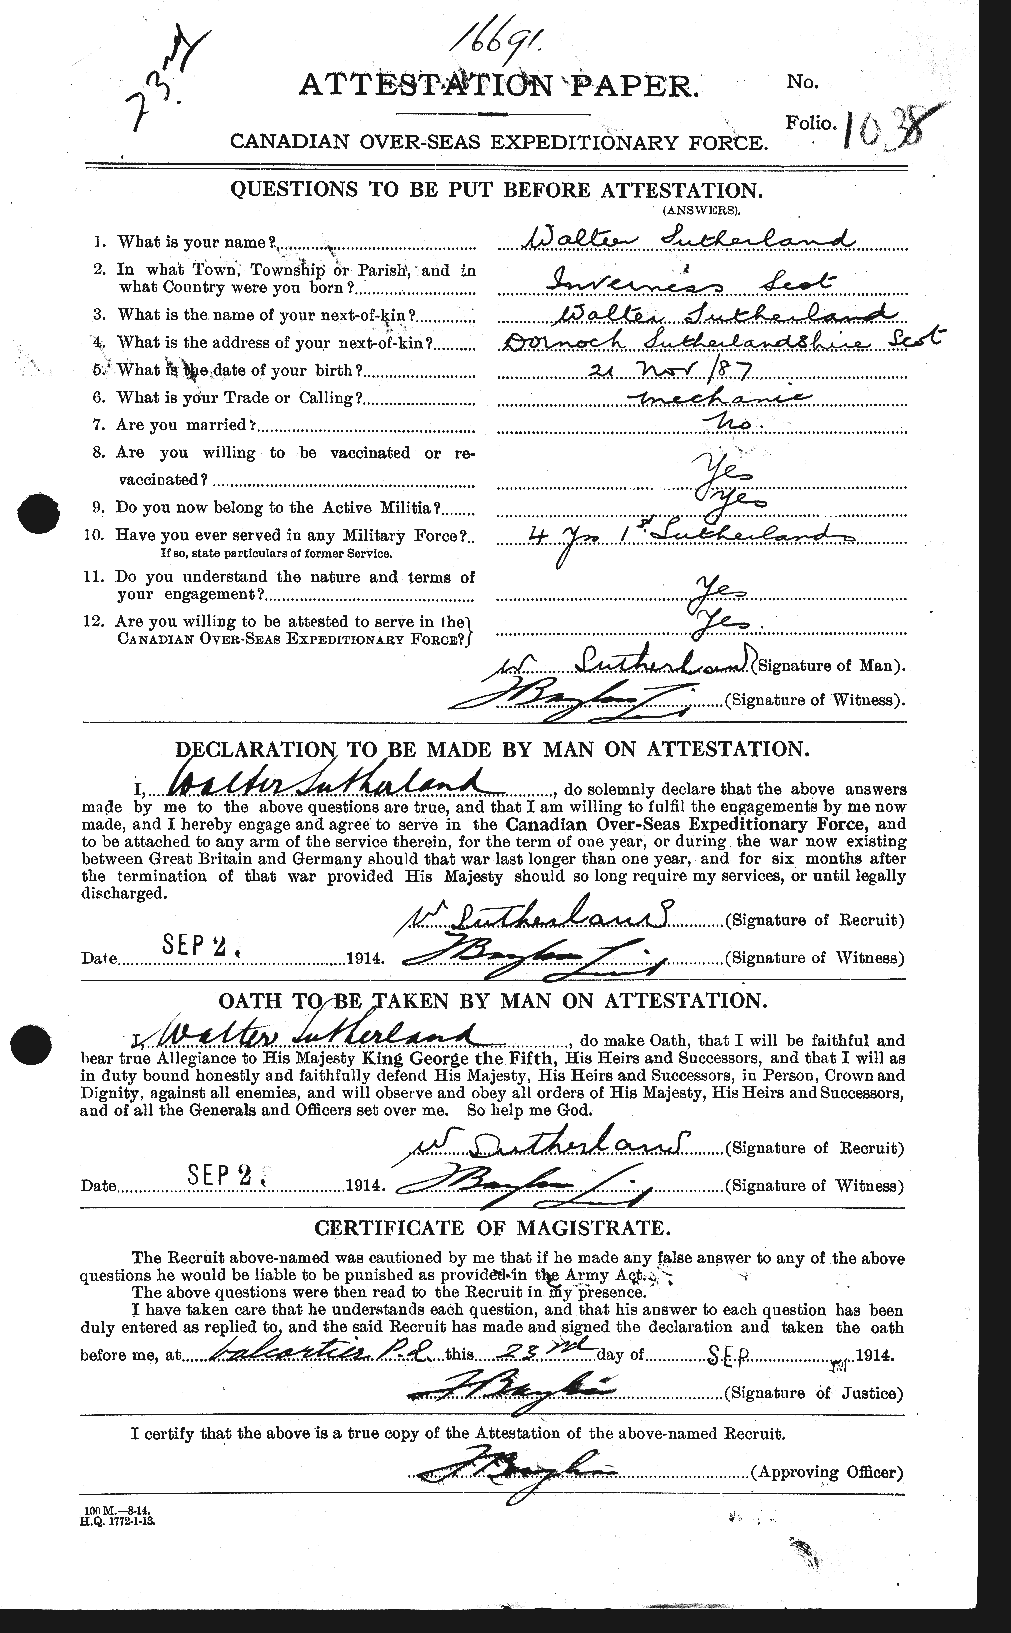 Personnel Records of the First World War - CEF 126533a